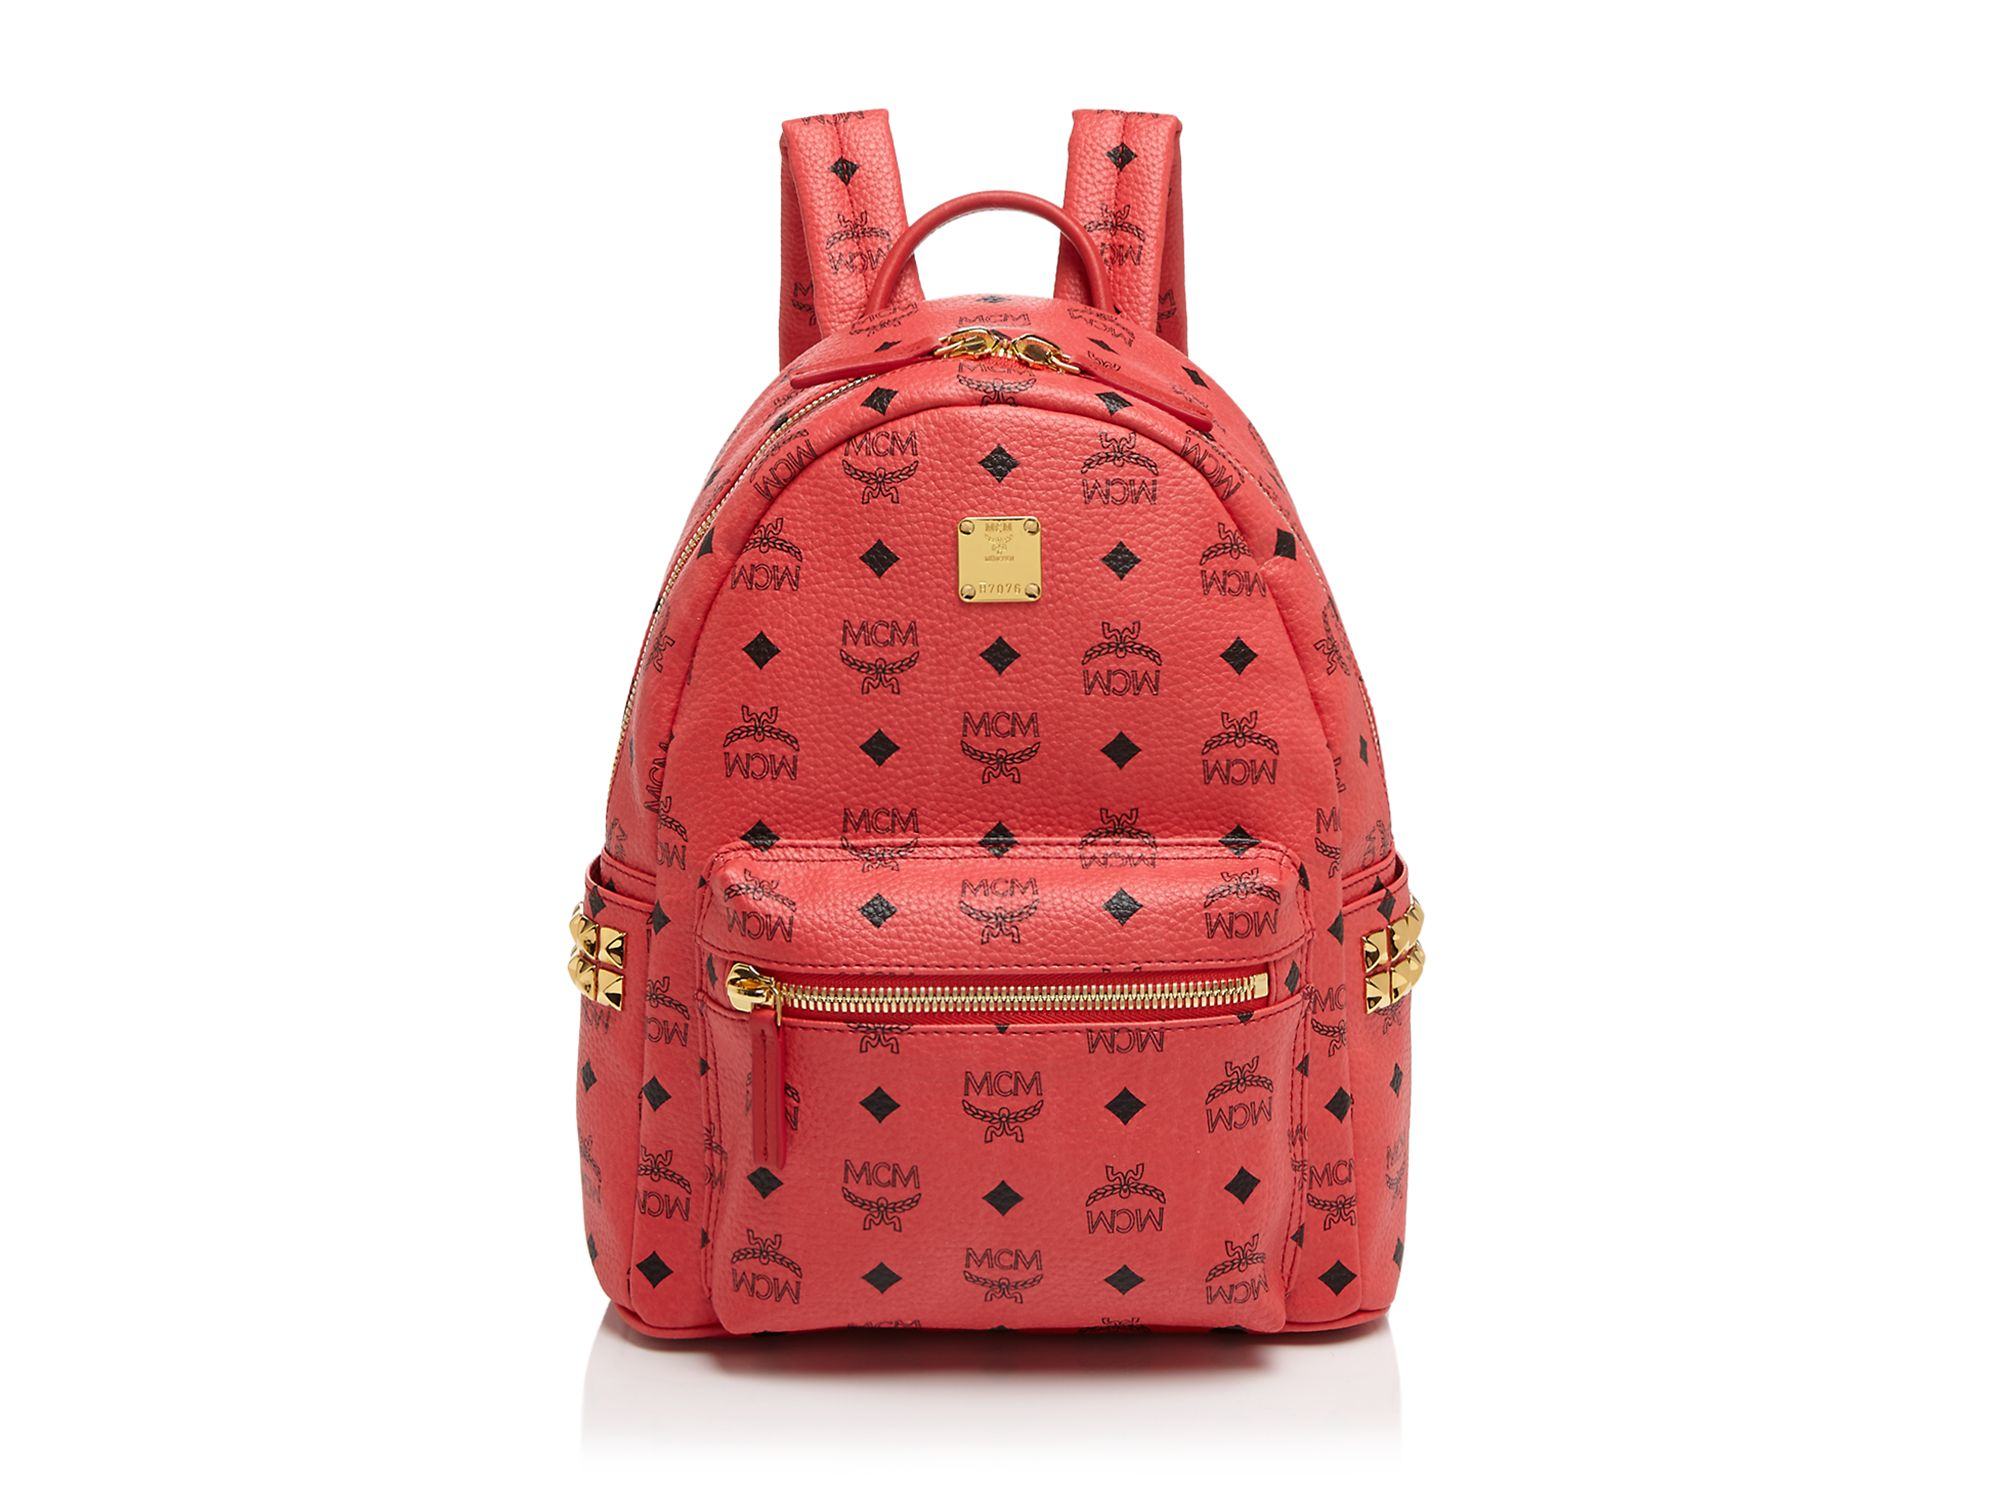 Lyst - MCM Backpack - Stark Side Stud Small in Red